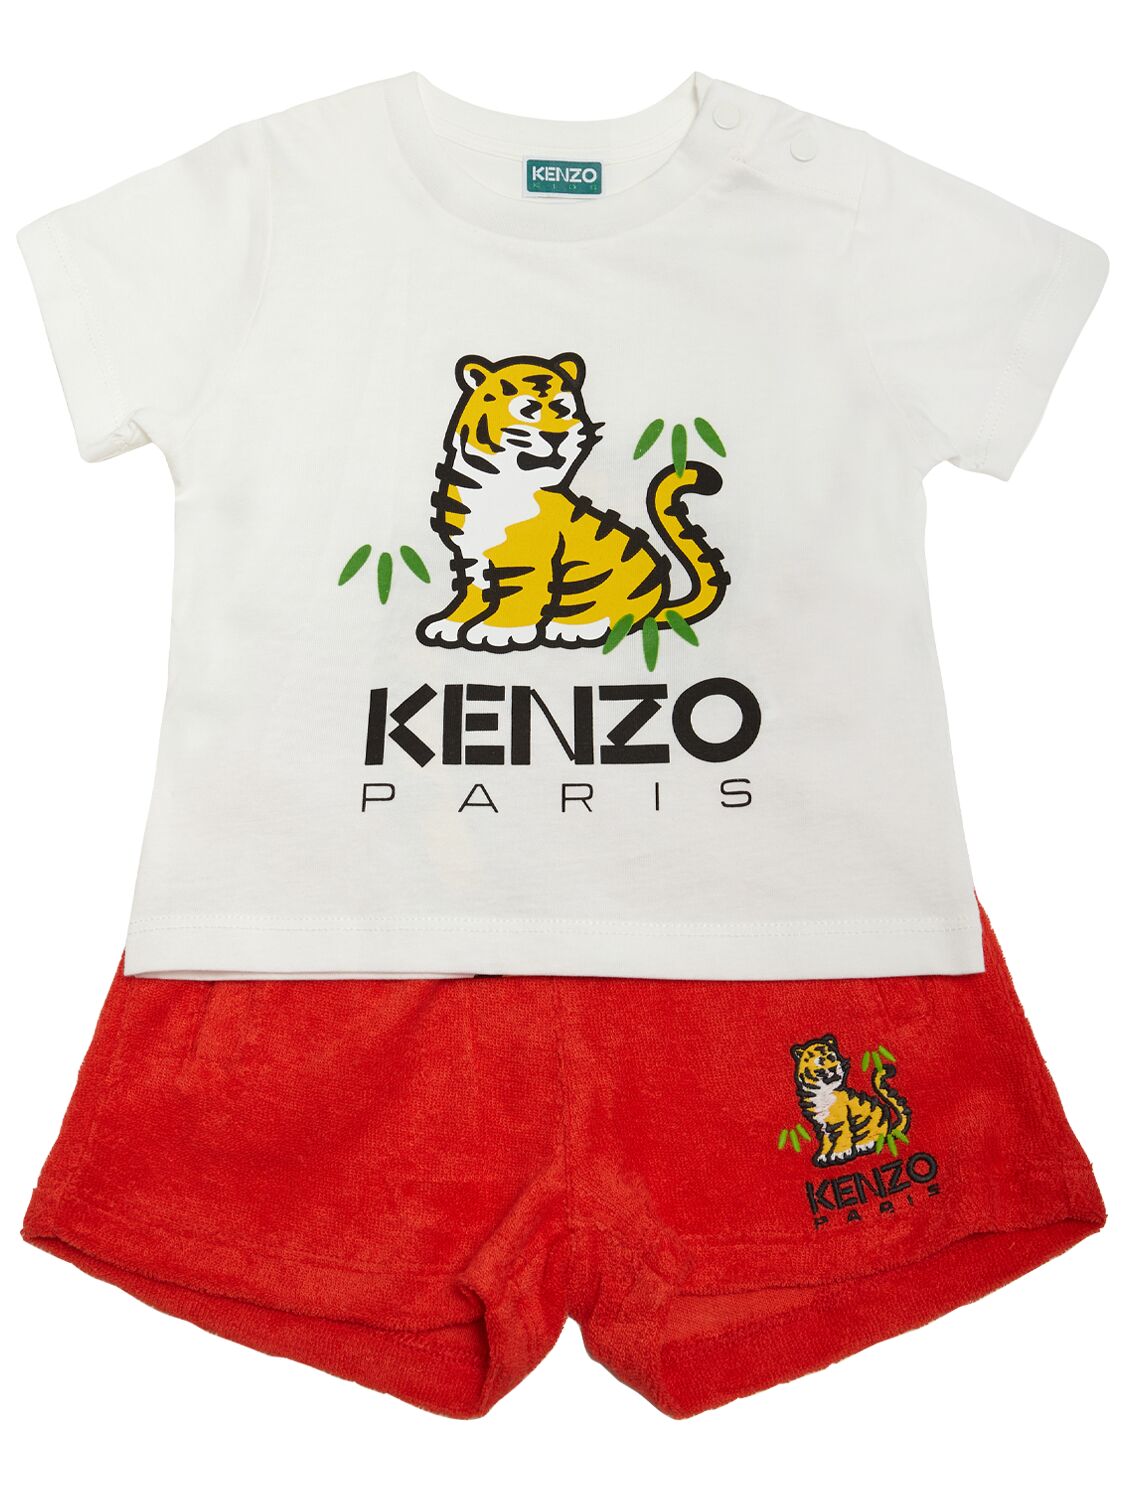 Kenzo Kids' Printed Cotton T-shirt & Terry Shorts In Red